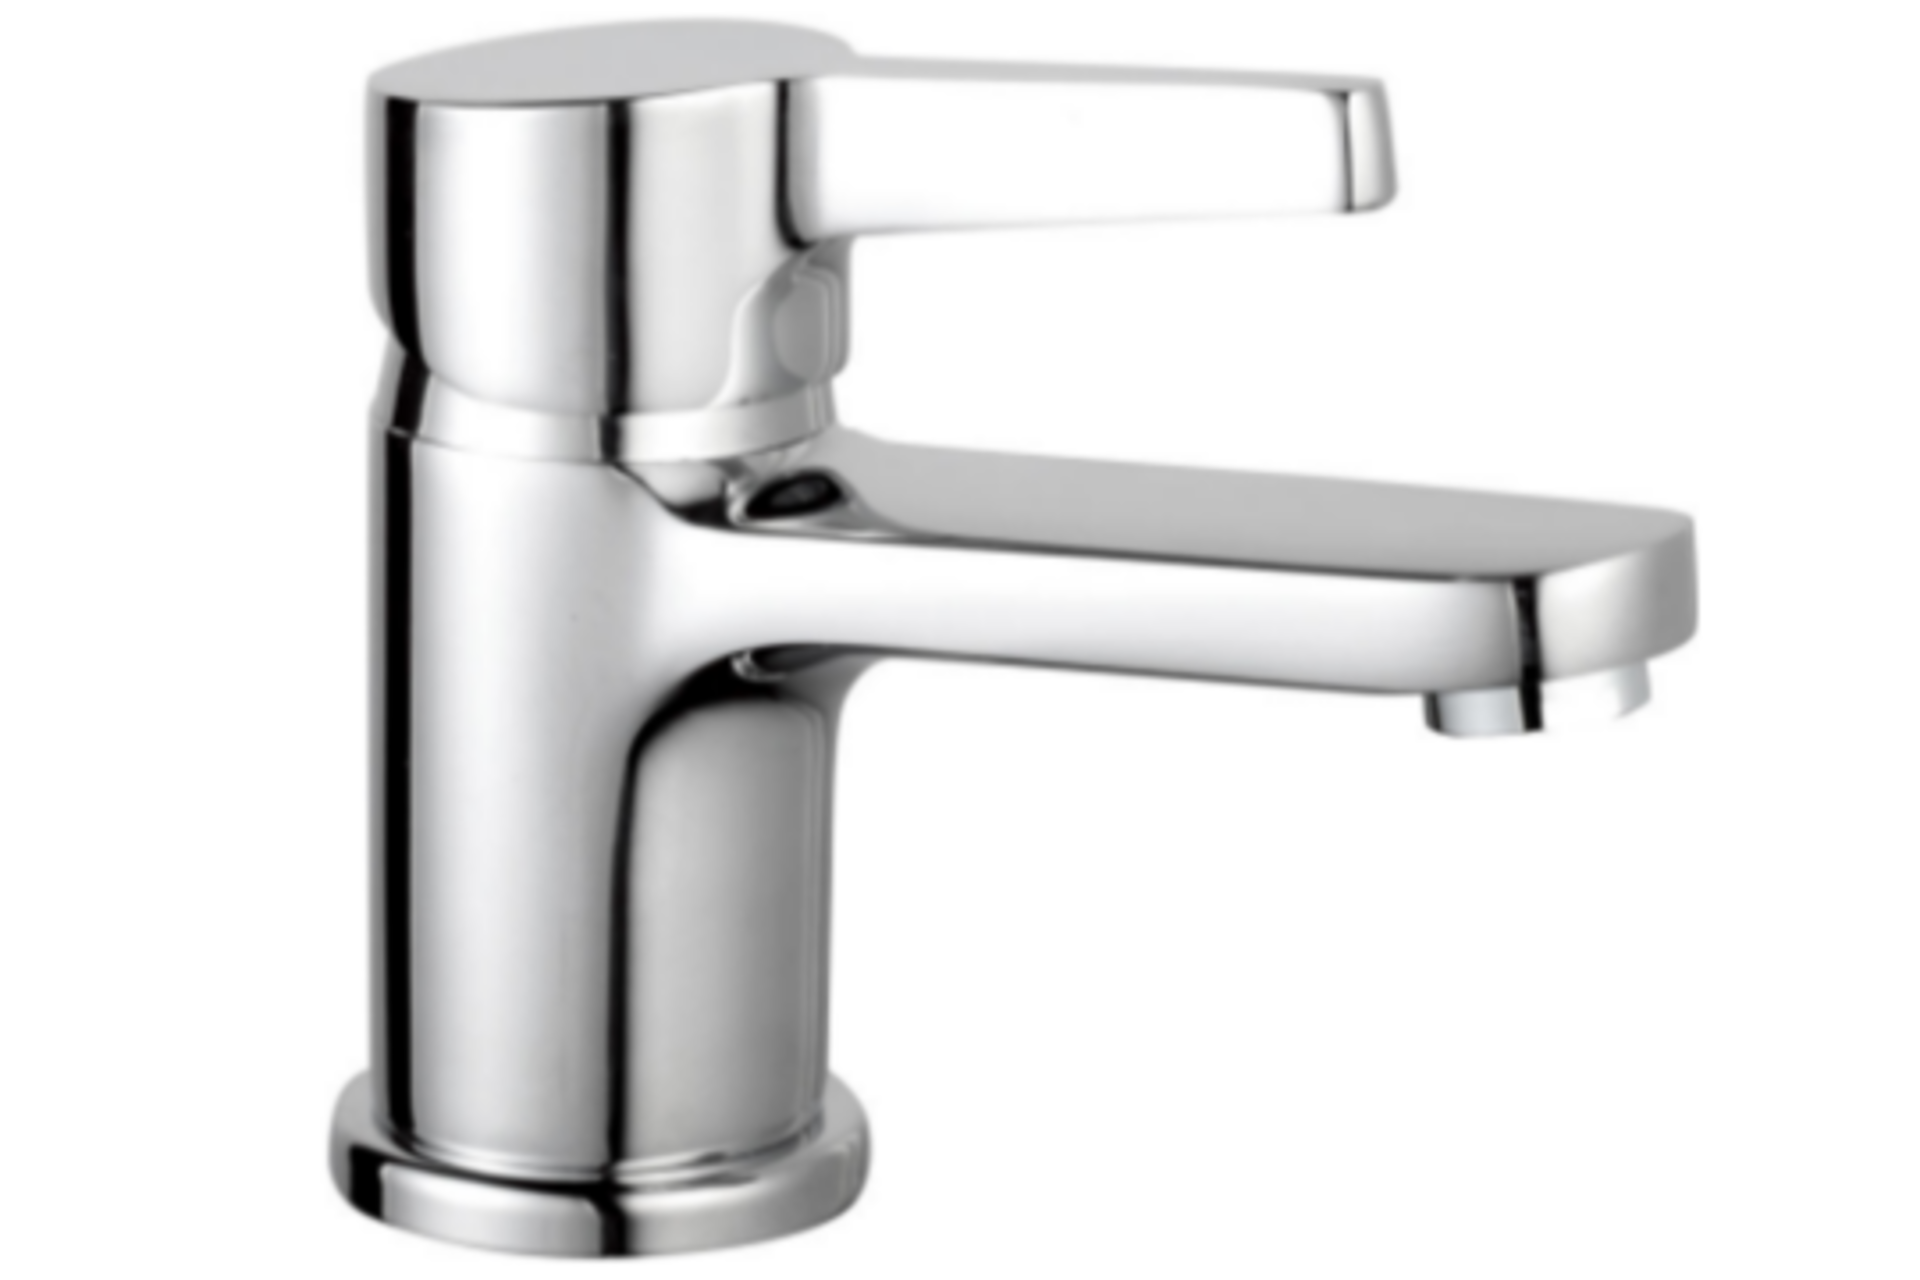 PALLET TO CONTAIN 60 x NEW BOXED Abode Lamona CONTEMPORARY CHROME BATHROOM BASIN TAPS. RRP £59.99